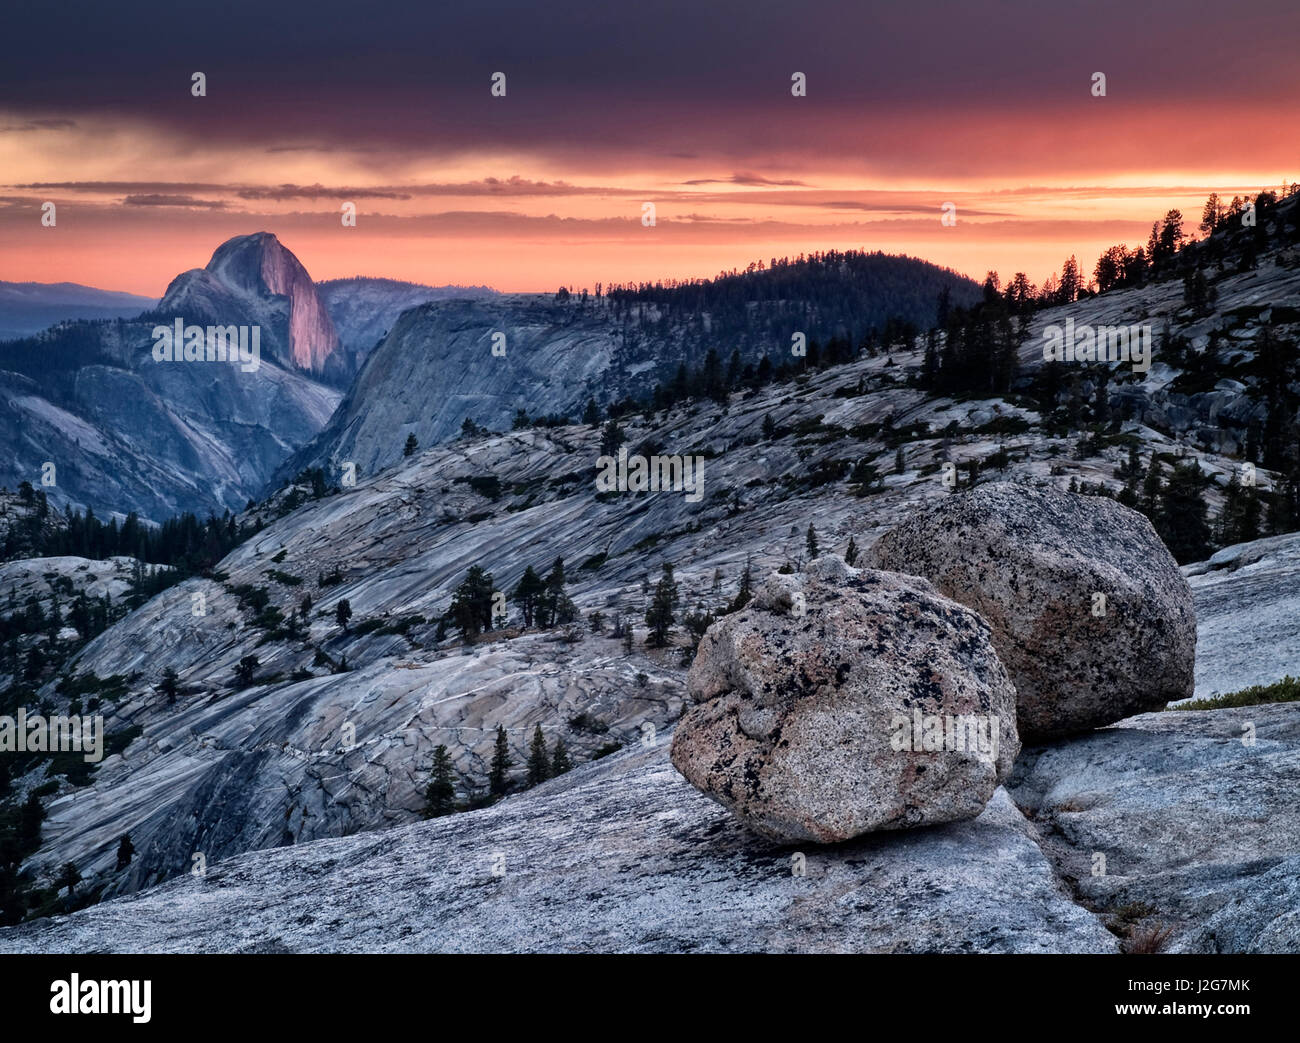 USA, California, Yosemite National Park. Sunset light on Half Dome from Olmsted Point Stock Photo